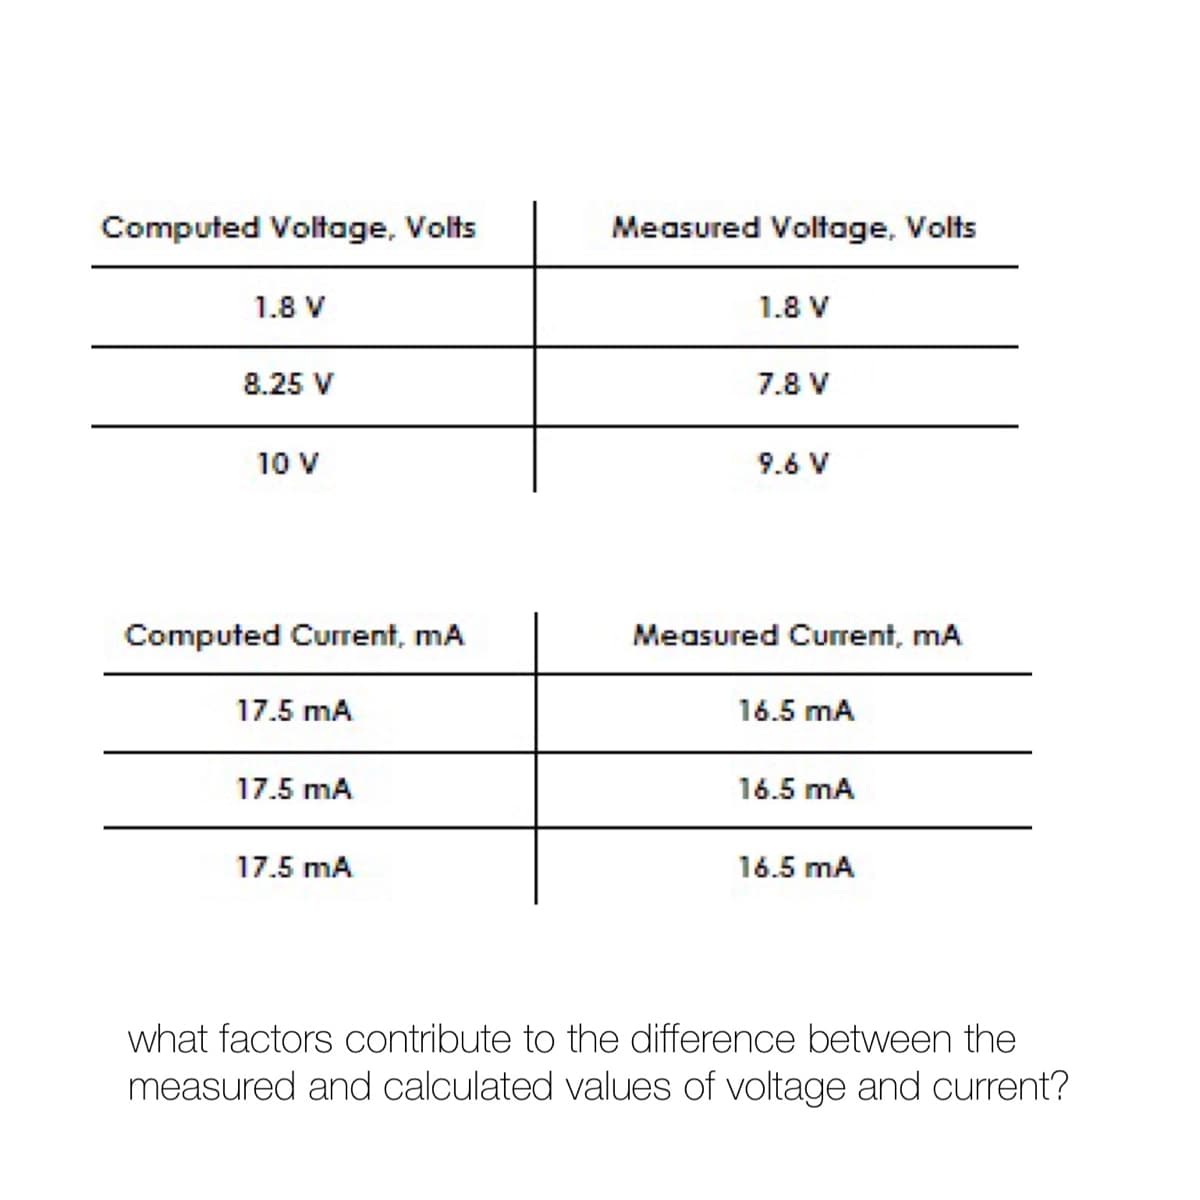 Computed Voltage, Volts
Measured Voltage, Volts
1.8 V
1.8 V
8.25 V
7.8 V
10 V
9.6 V
Computed Current, mA
Measured Current, mA
17.5 mA
16.5 mA
17.5 mA
16.5 mA
17.5 mA
16.5 mA
what factors contribute to the difference between the
measured and calculated values of voltage and current?
